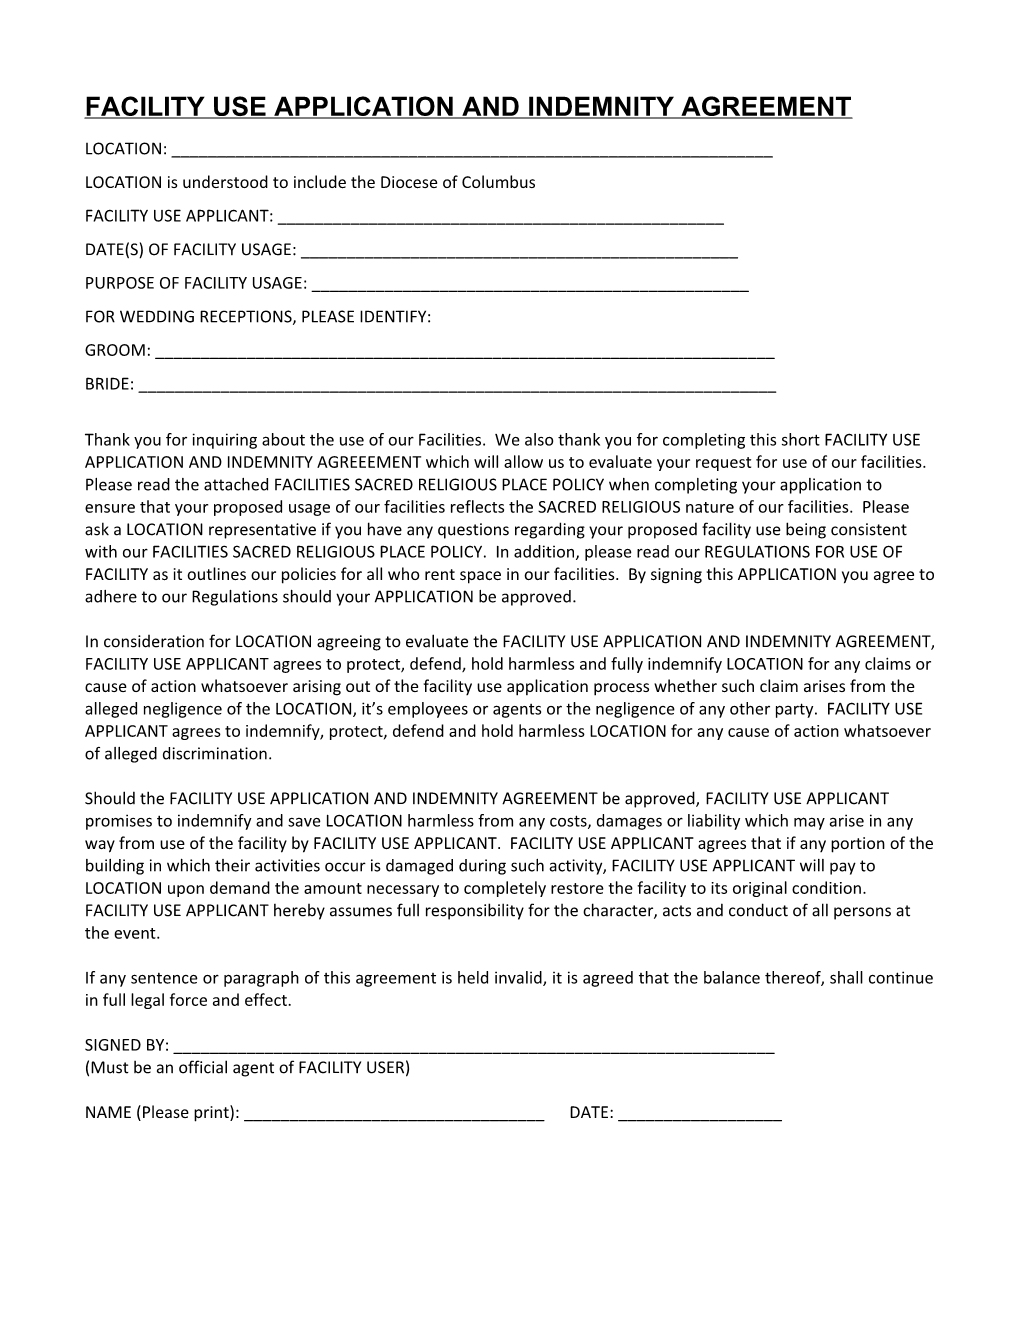 Facility Use Application and Indemnity Agreement